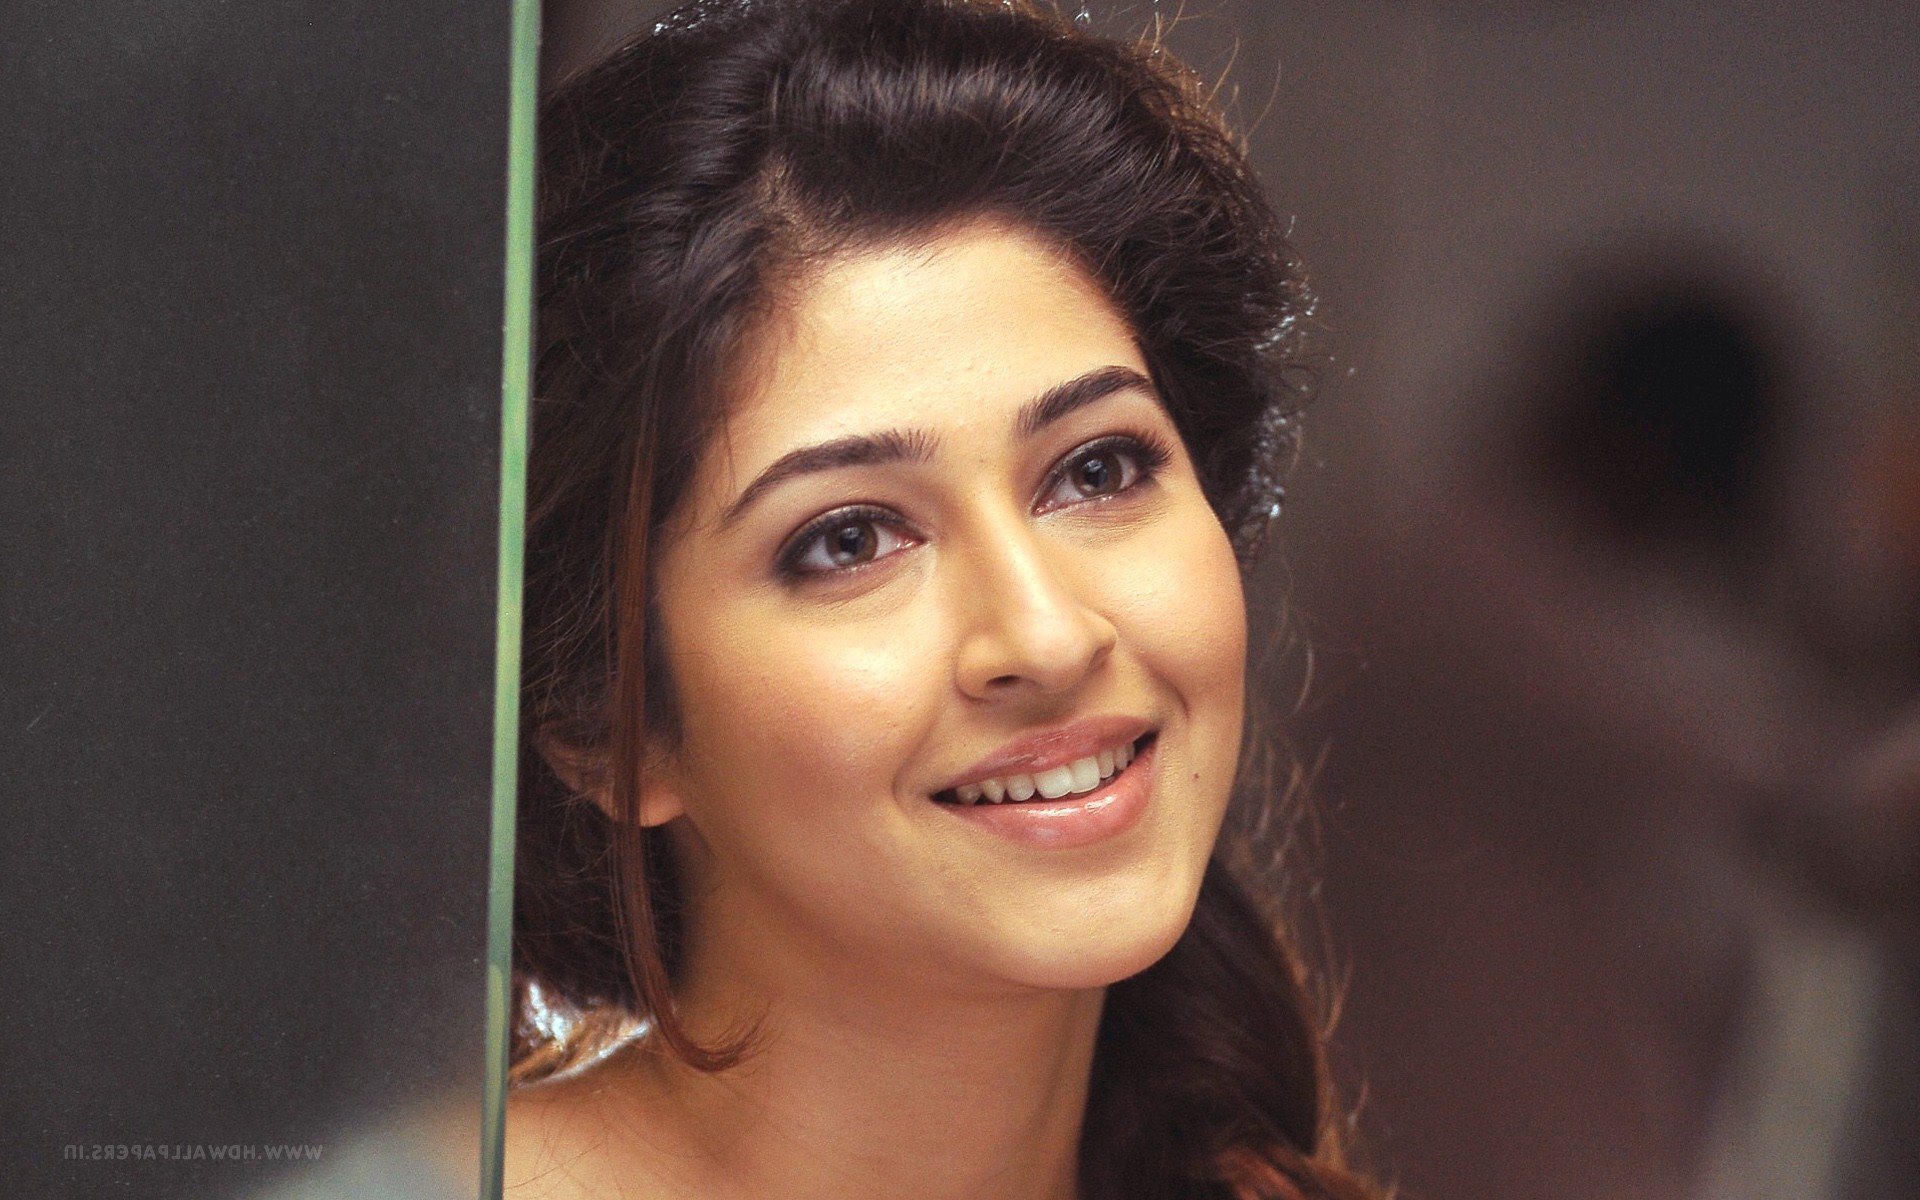 Sonarika bhadoria hd indian celebrities k wallpapers images backgrounds photos and pictures